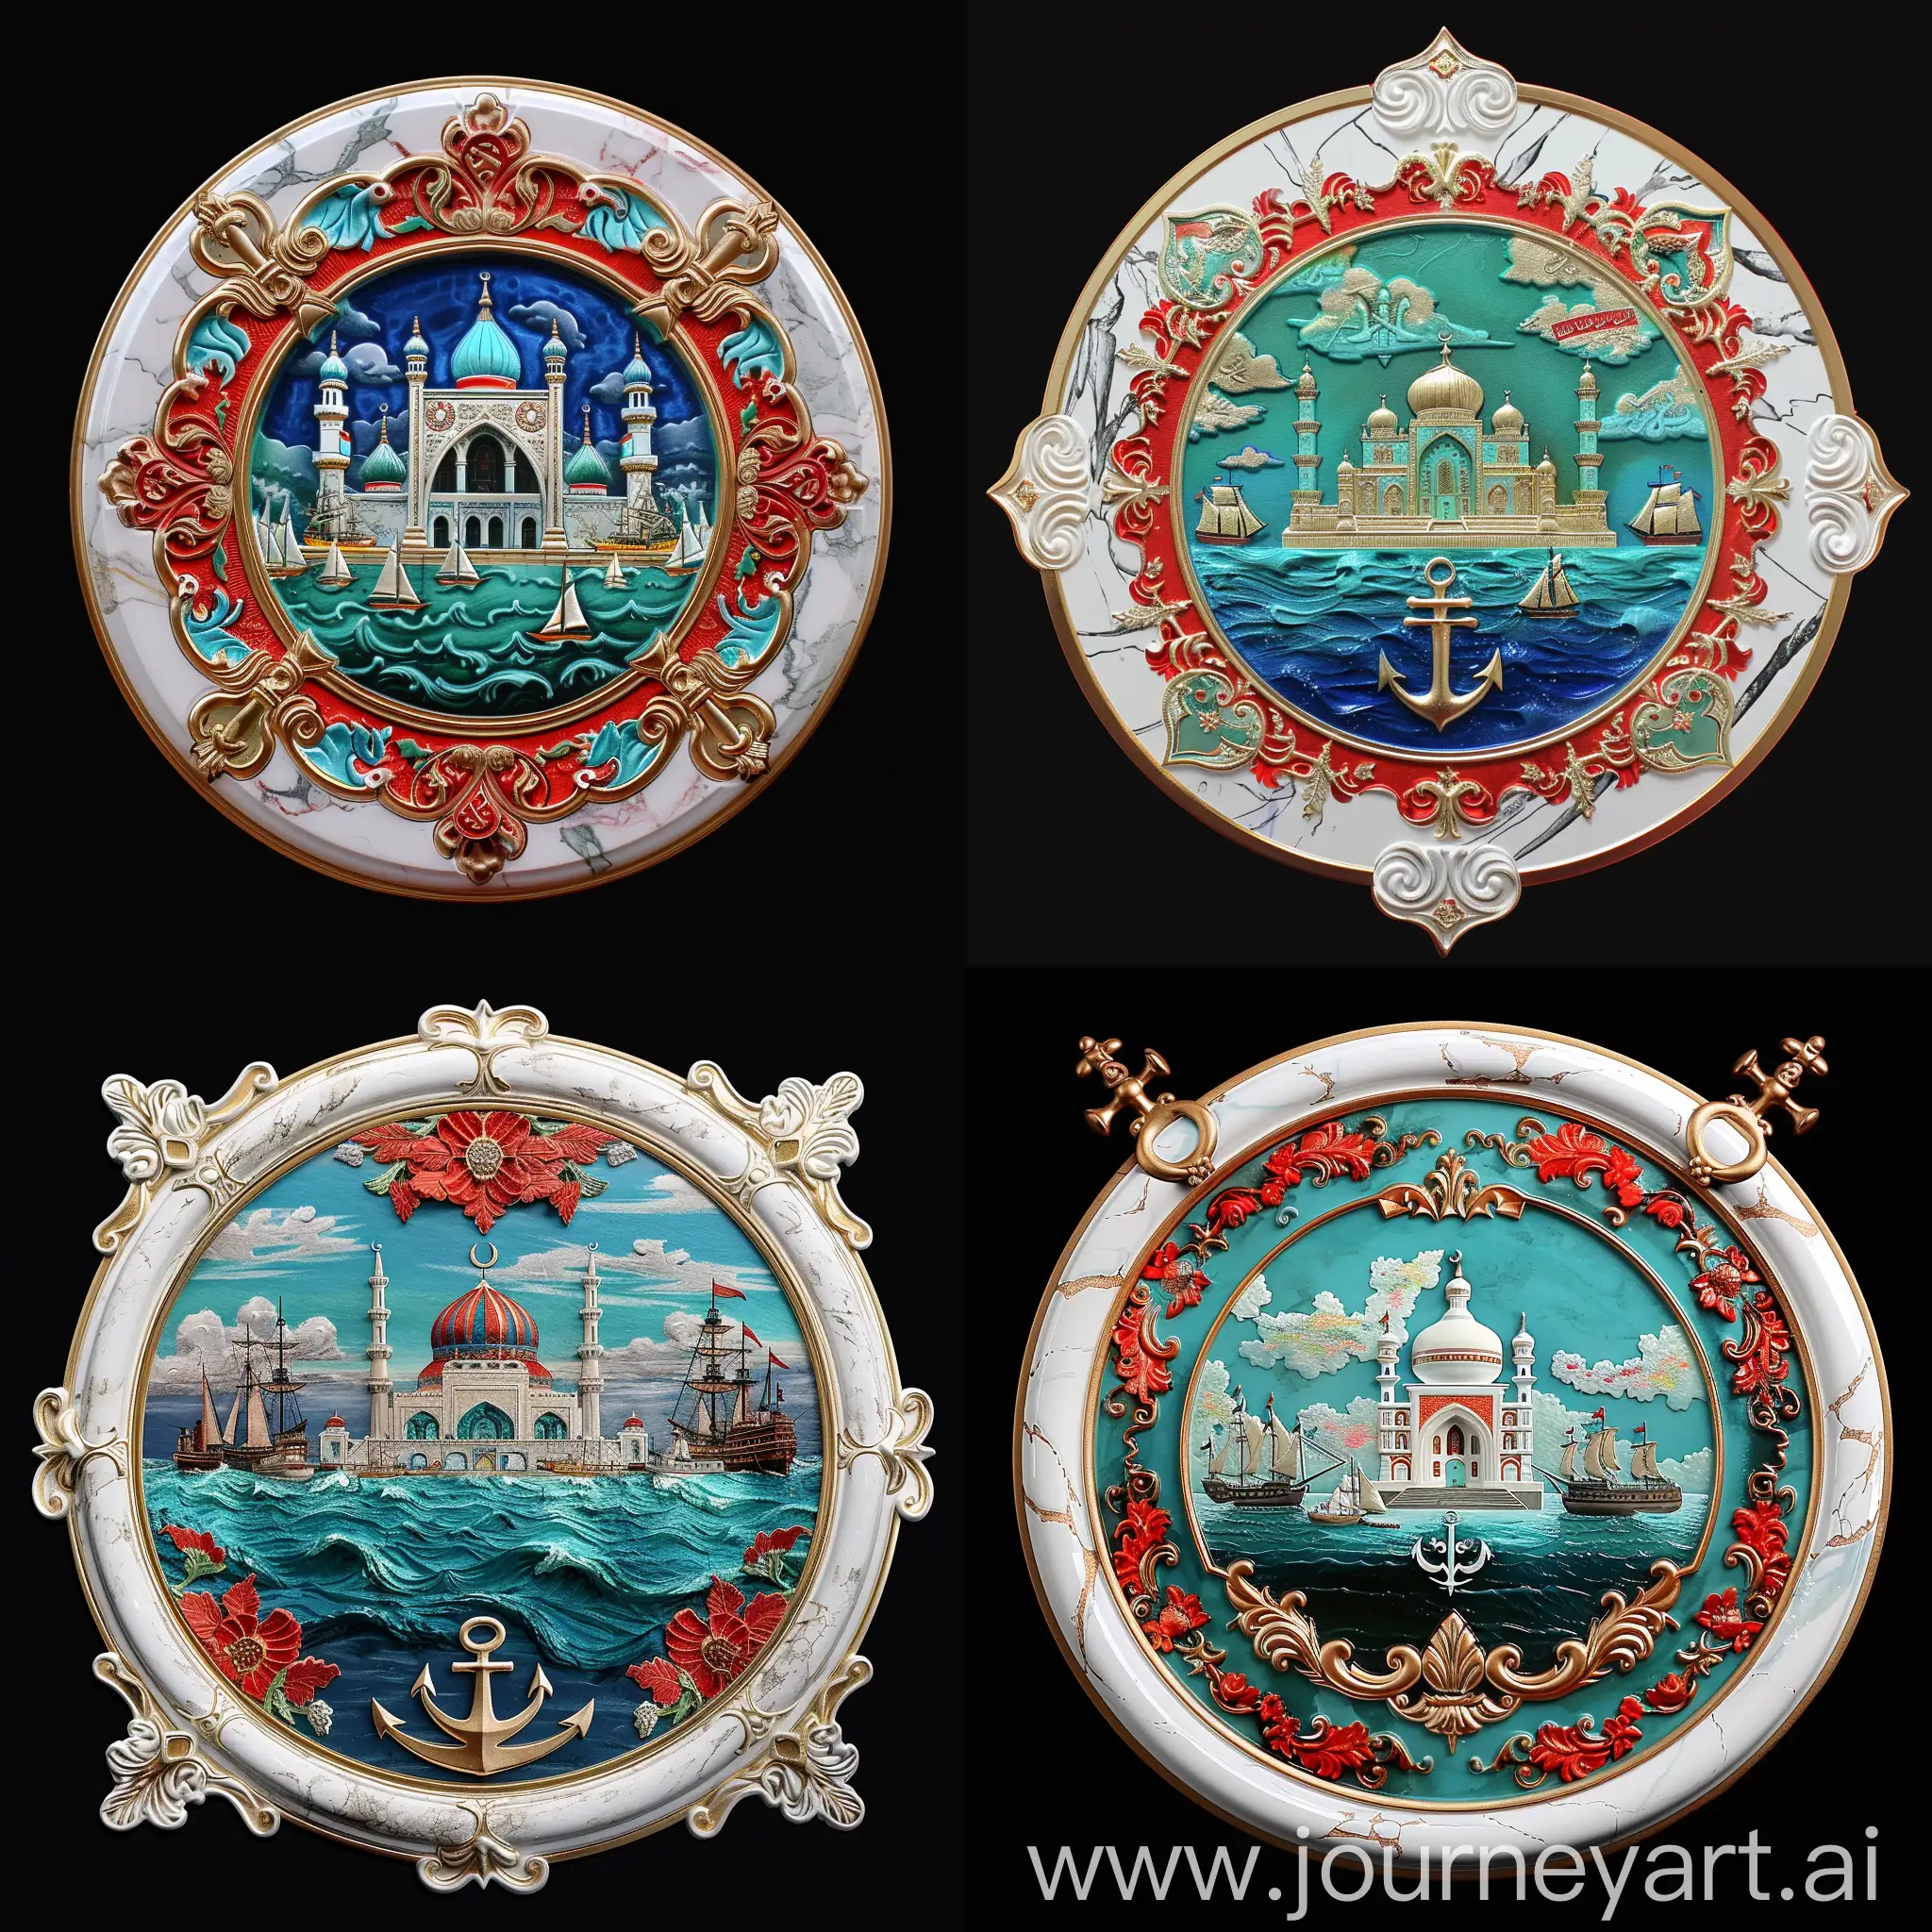 an arabesque shaped round medal, inframing 3d embossed style red blue turquoise green white colorful painting depicting a Persian mosque beyond a sea with ships, Symmetric front perspective, solid red blue Persian floral design with golden outline embossed on border, torus moulding white marbled border, 3d Naval symbols affixed at corners of medal, shiny metallic gold framed, black background 